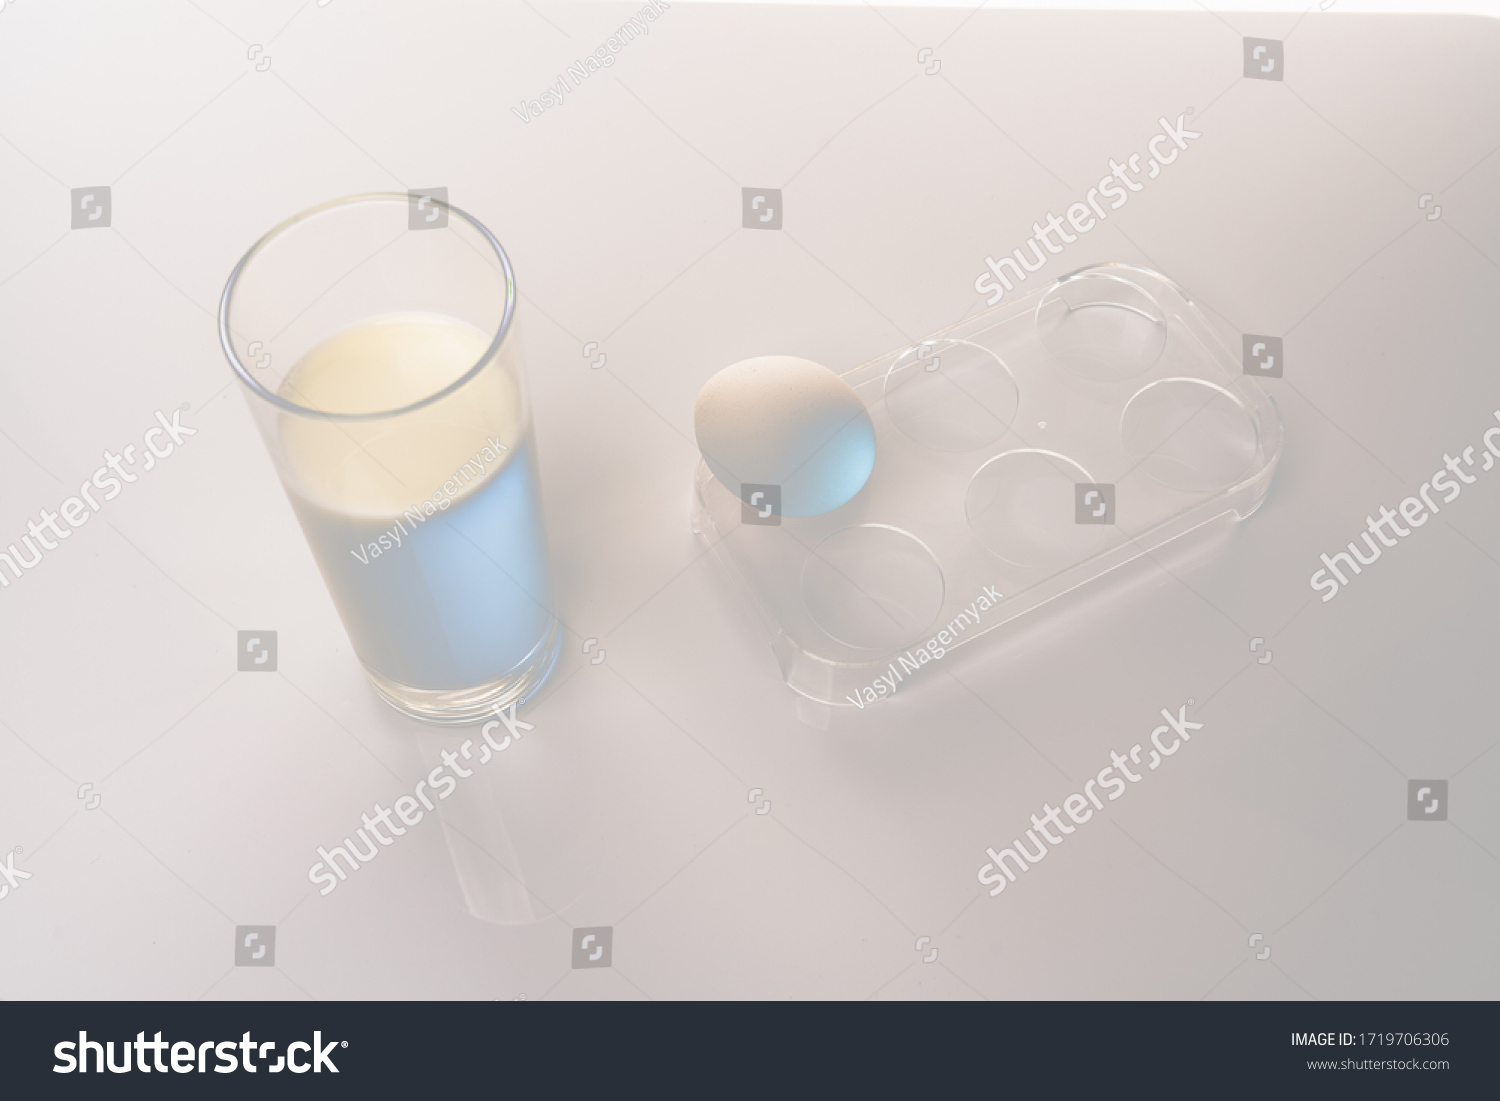 Glass of milk and chicken egg in plastic holder isolated on white background #1719706306